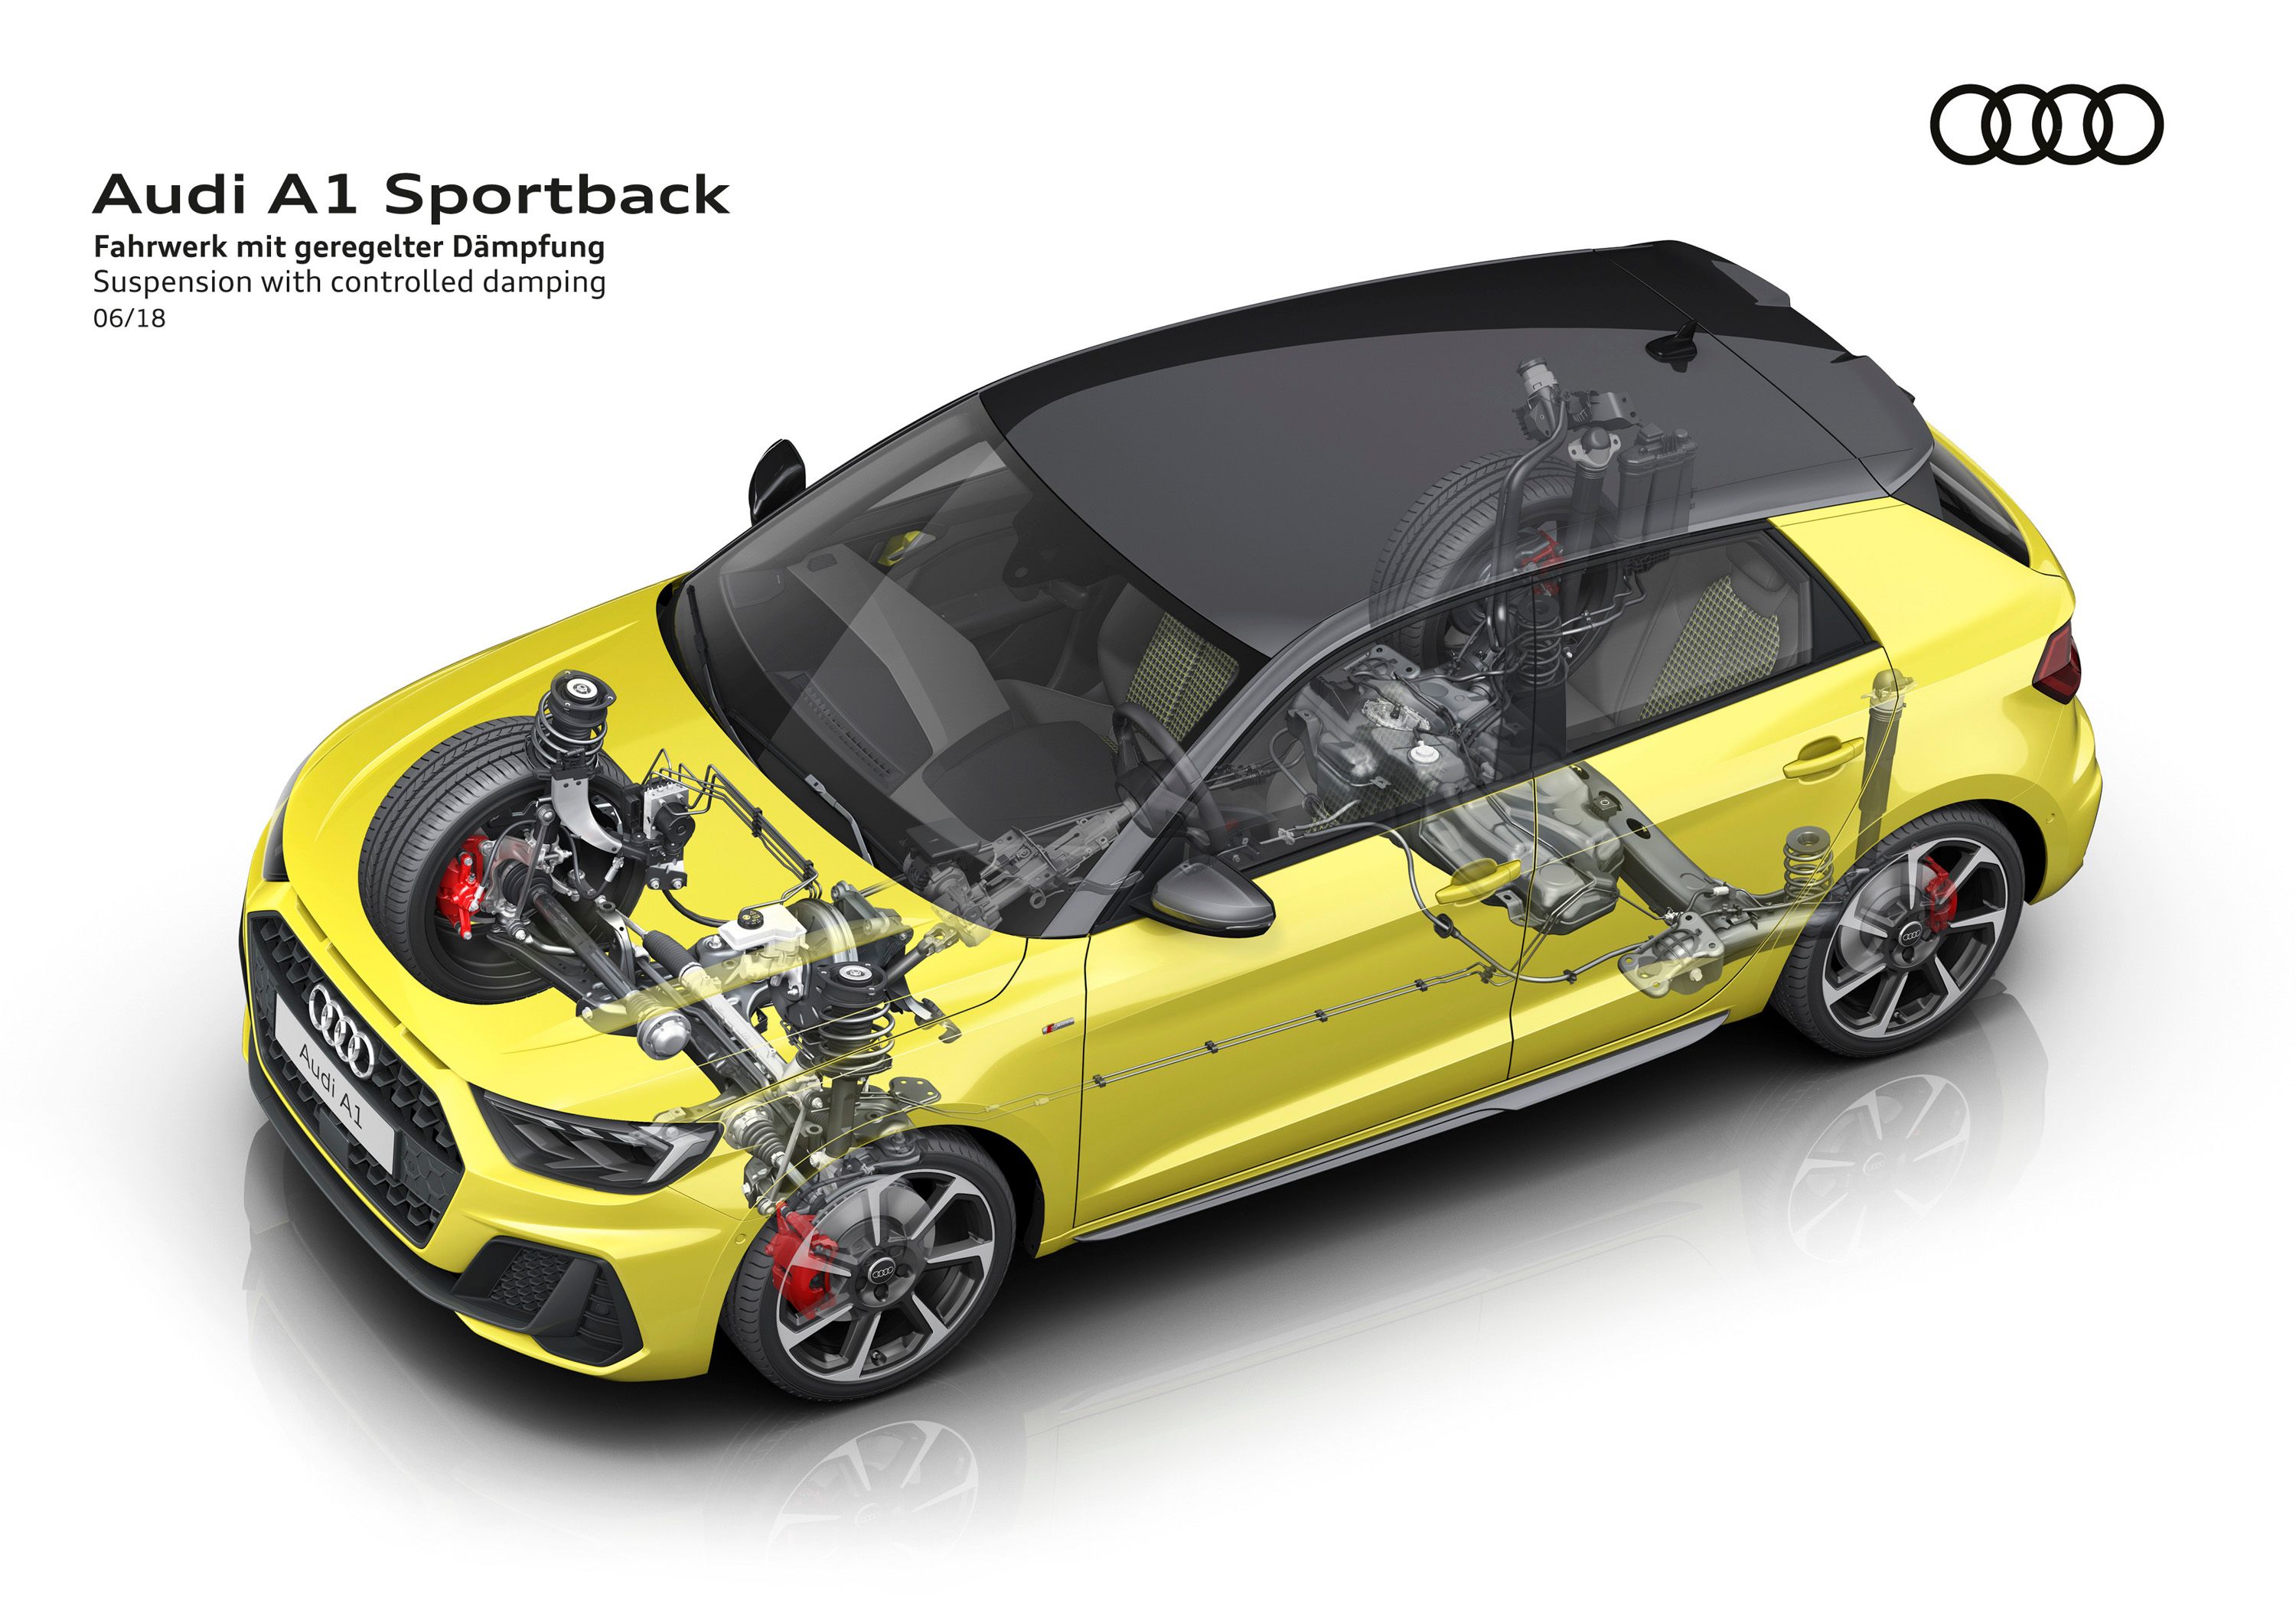 2019 Audi A1 Sportback Is A Handsome Half Pint With Up To 200 HP